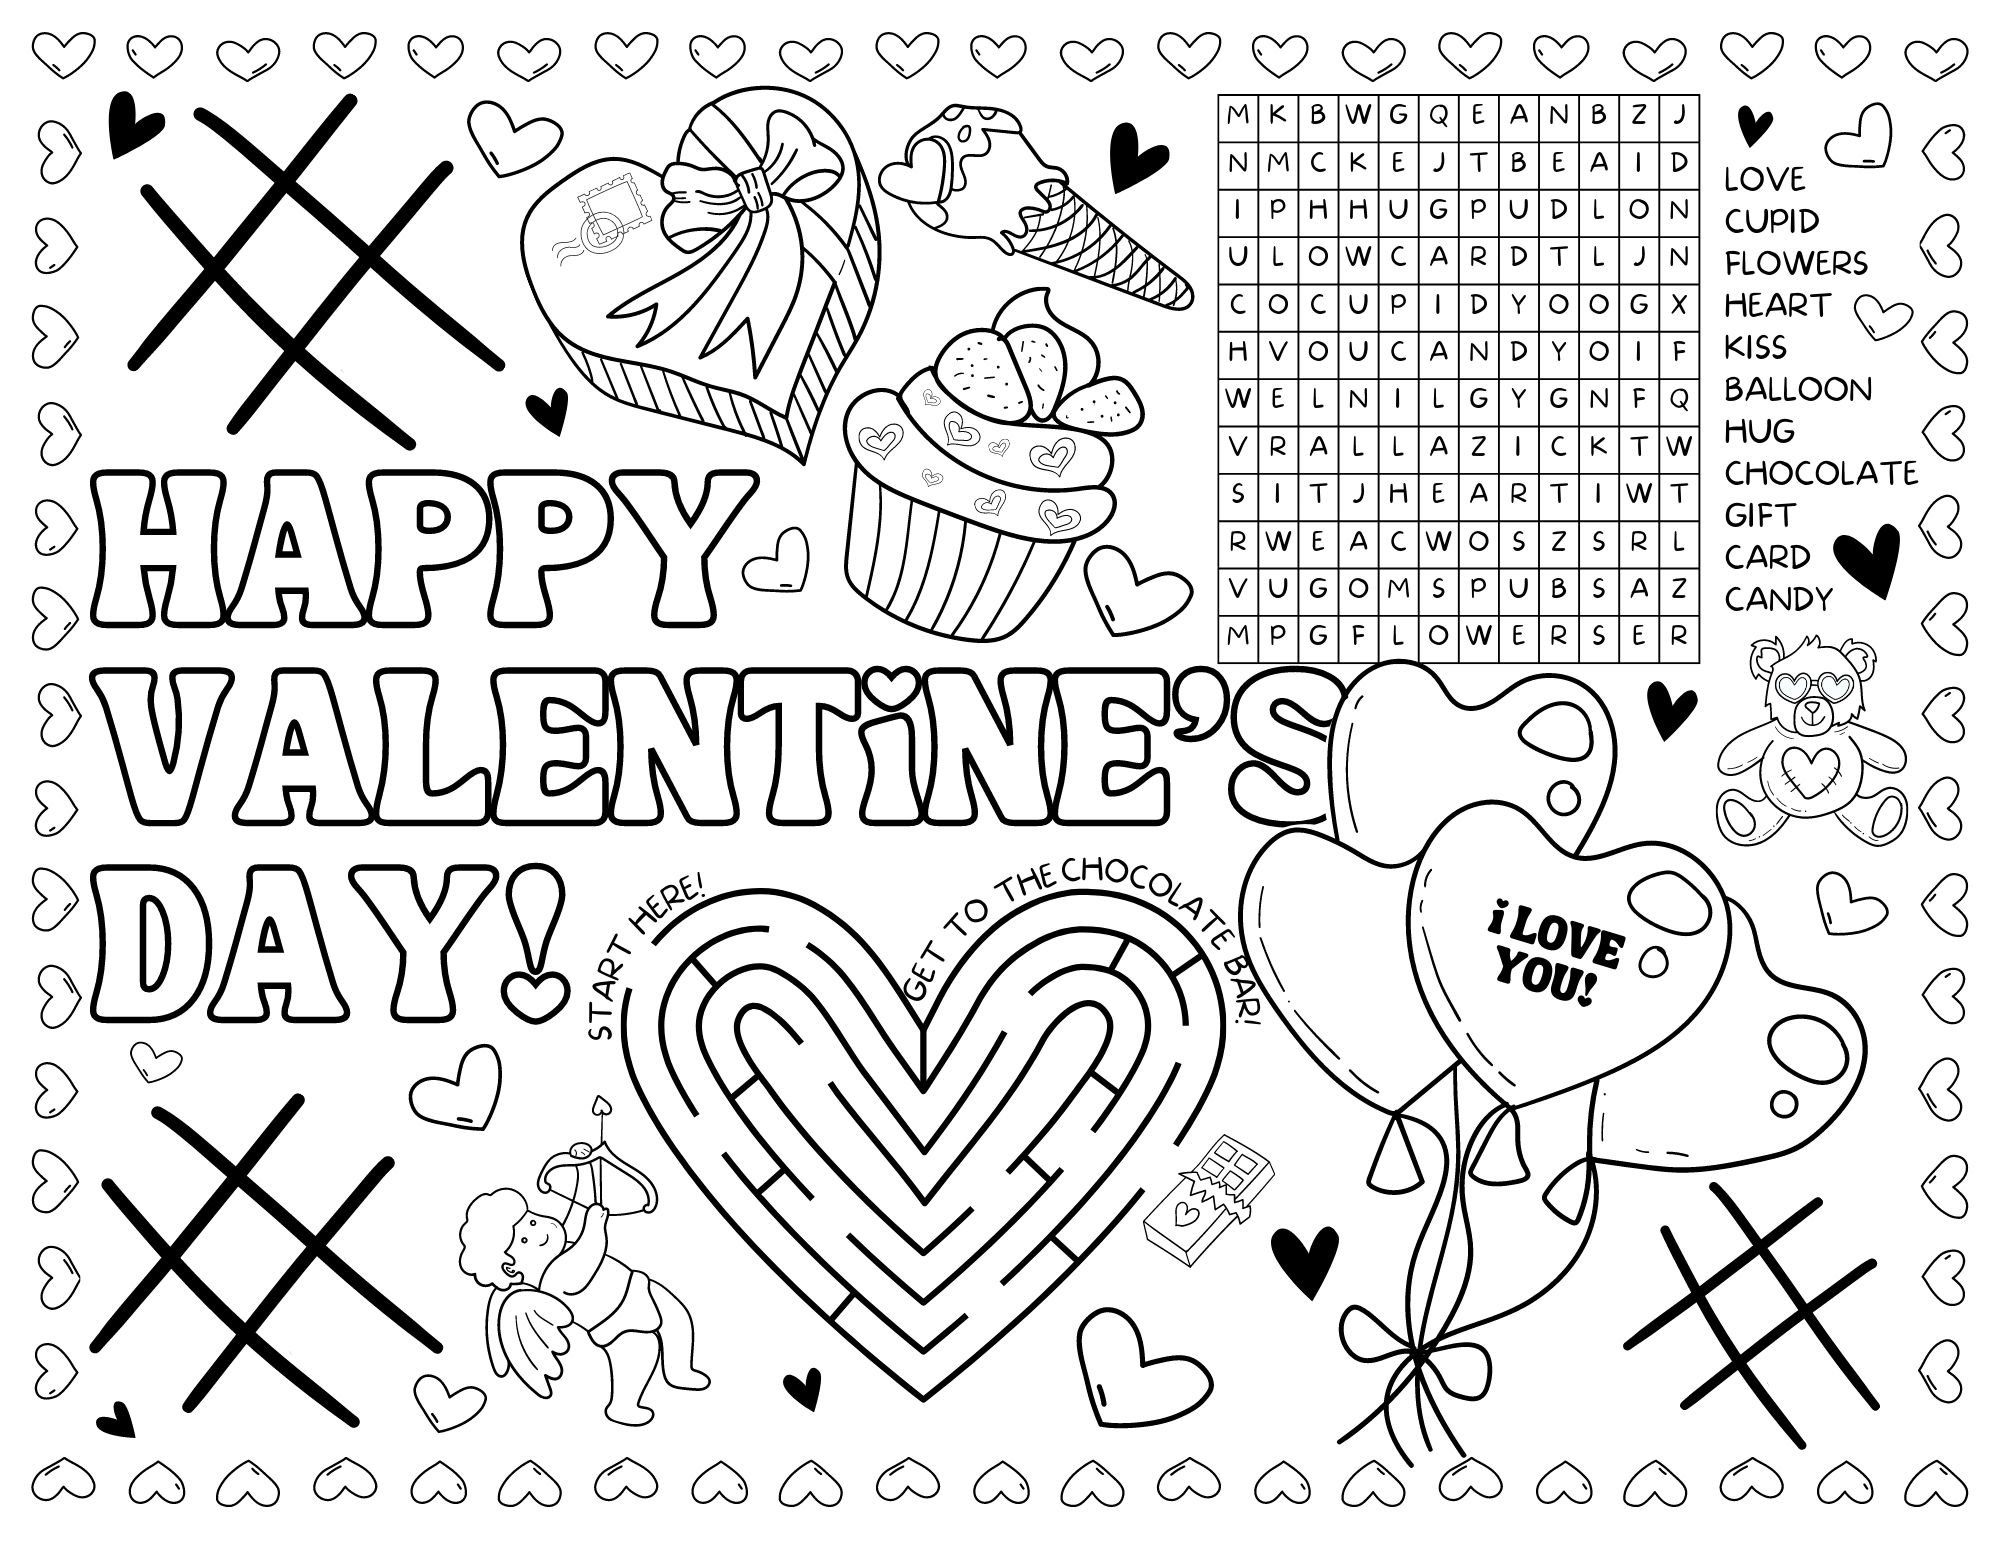 Candy Hearts Kid's Activity - Free Printables! 